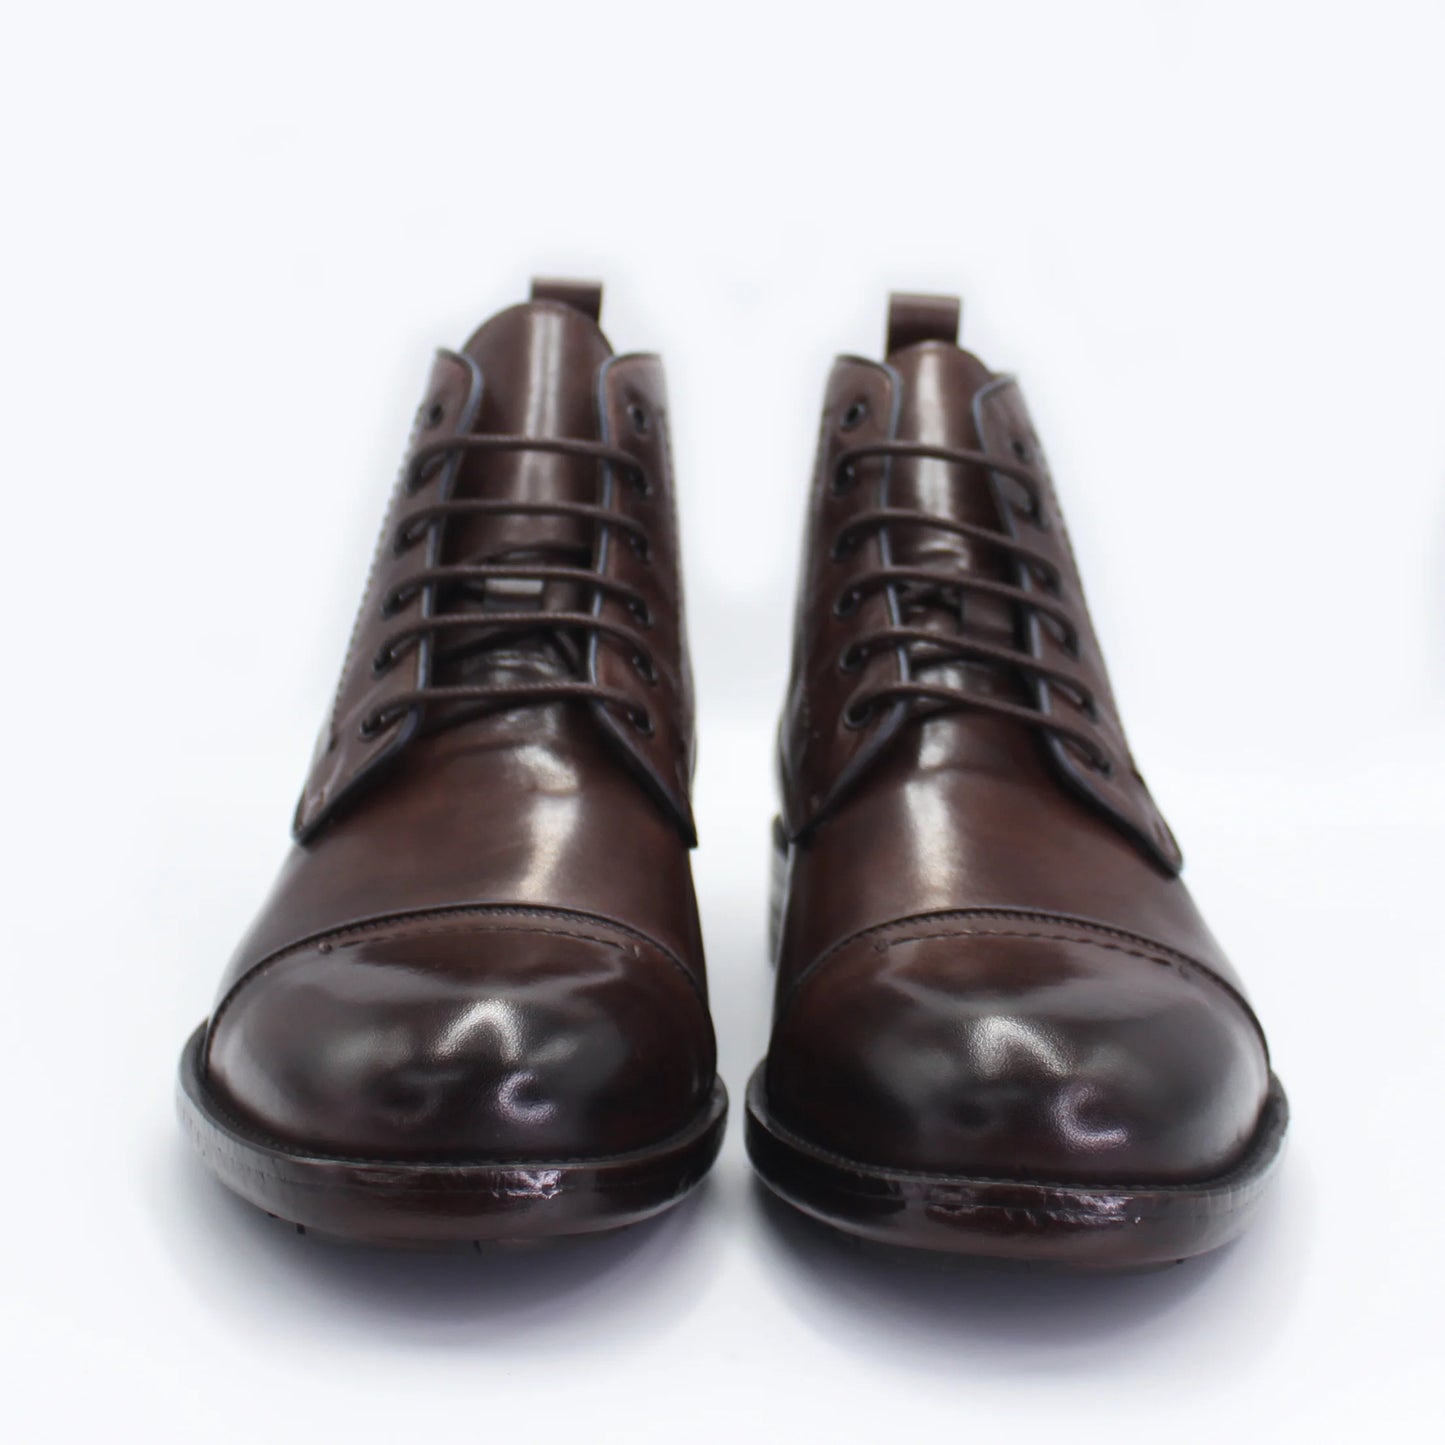 Shop Handmade Italian Leather Lace-Up Boot in Cioccolato Brown (10876) or browse our range of hand-made Italian boots for men in leather or suede in-store at Aliverti Durban or Cape Town, or shop online. We deliver in South Africa & offer multiple payment plans as well as accept multiple safe & secure payment methods.